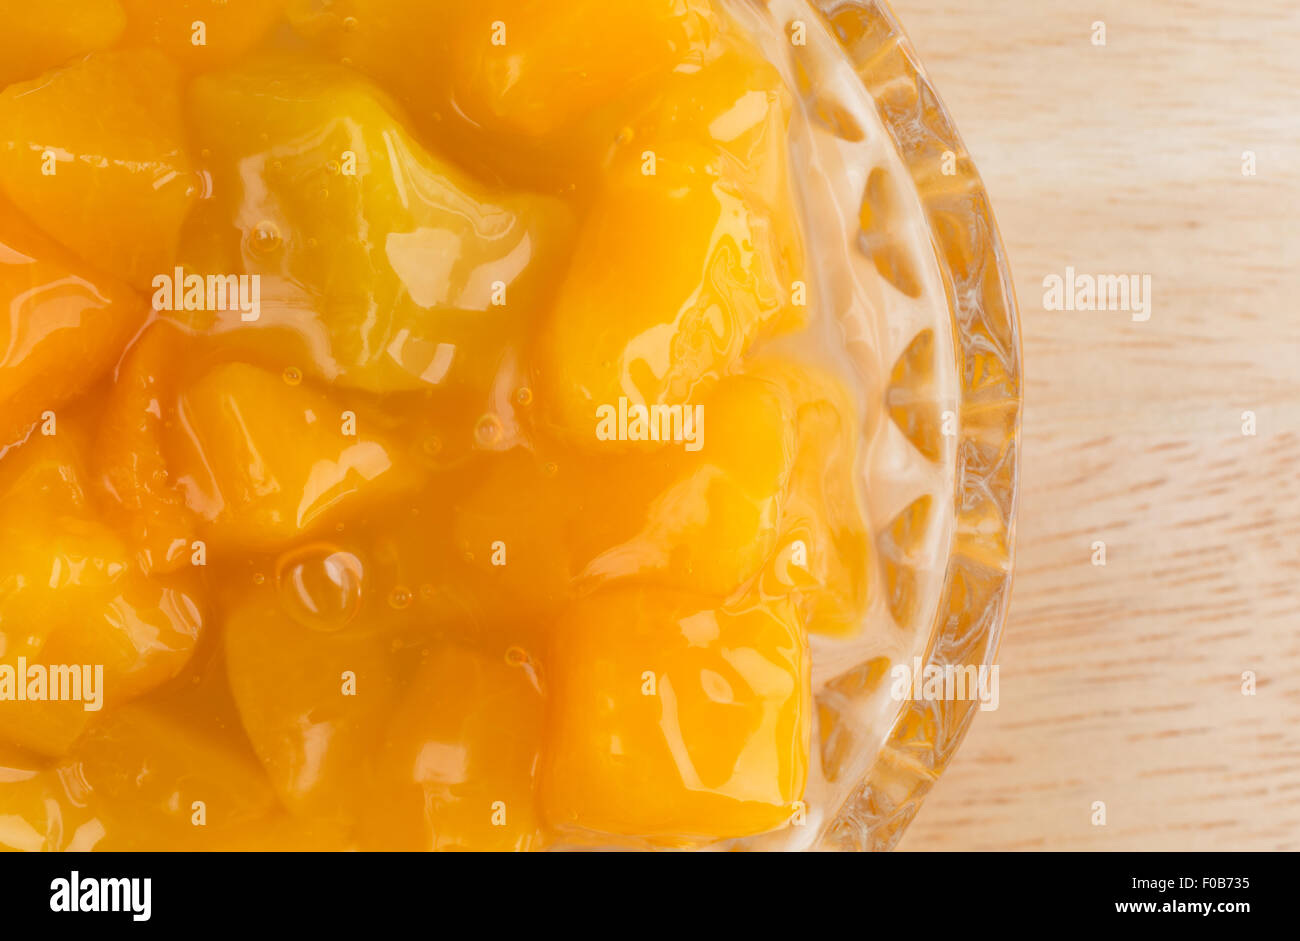 Top close view of a small glass bowl of diced peaches in heavy syrup on a wood table top illuminated with natural light. Stock Photo